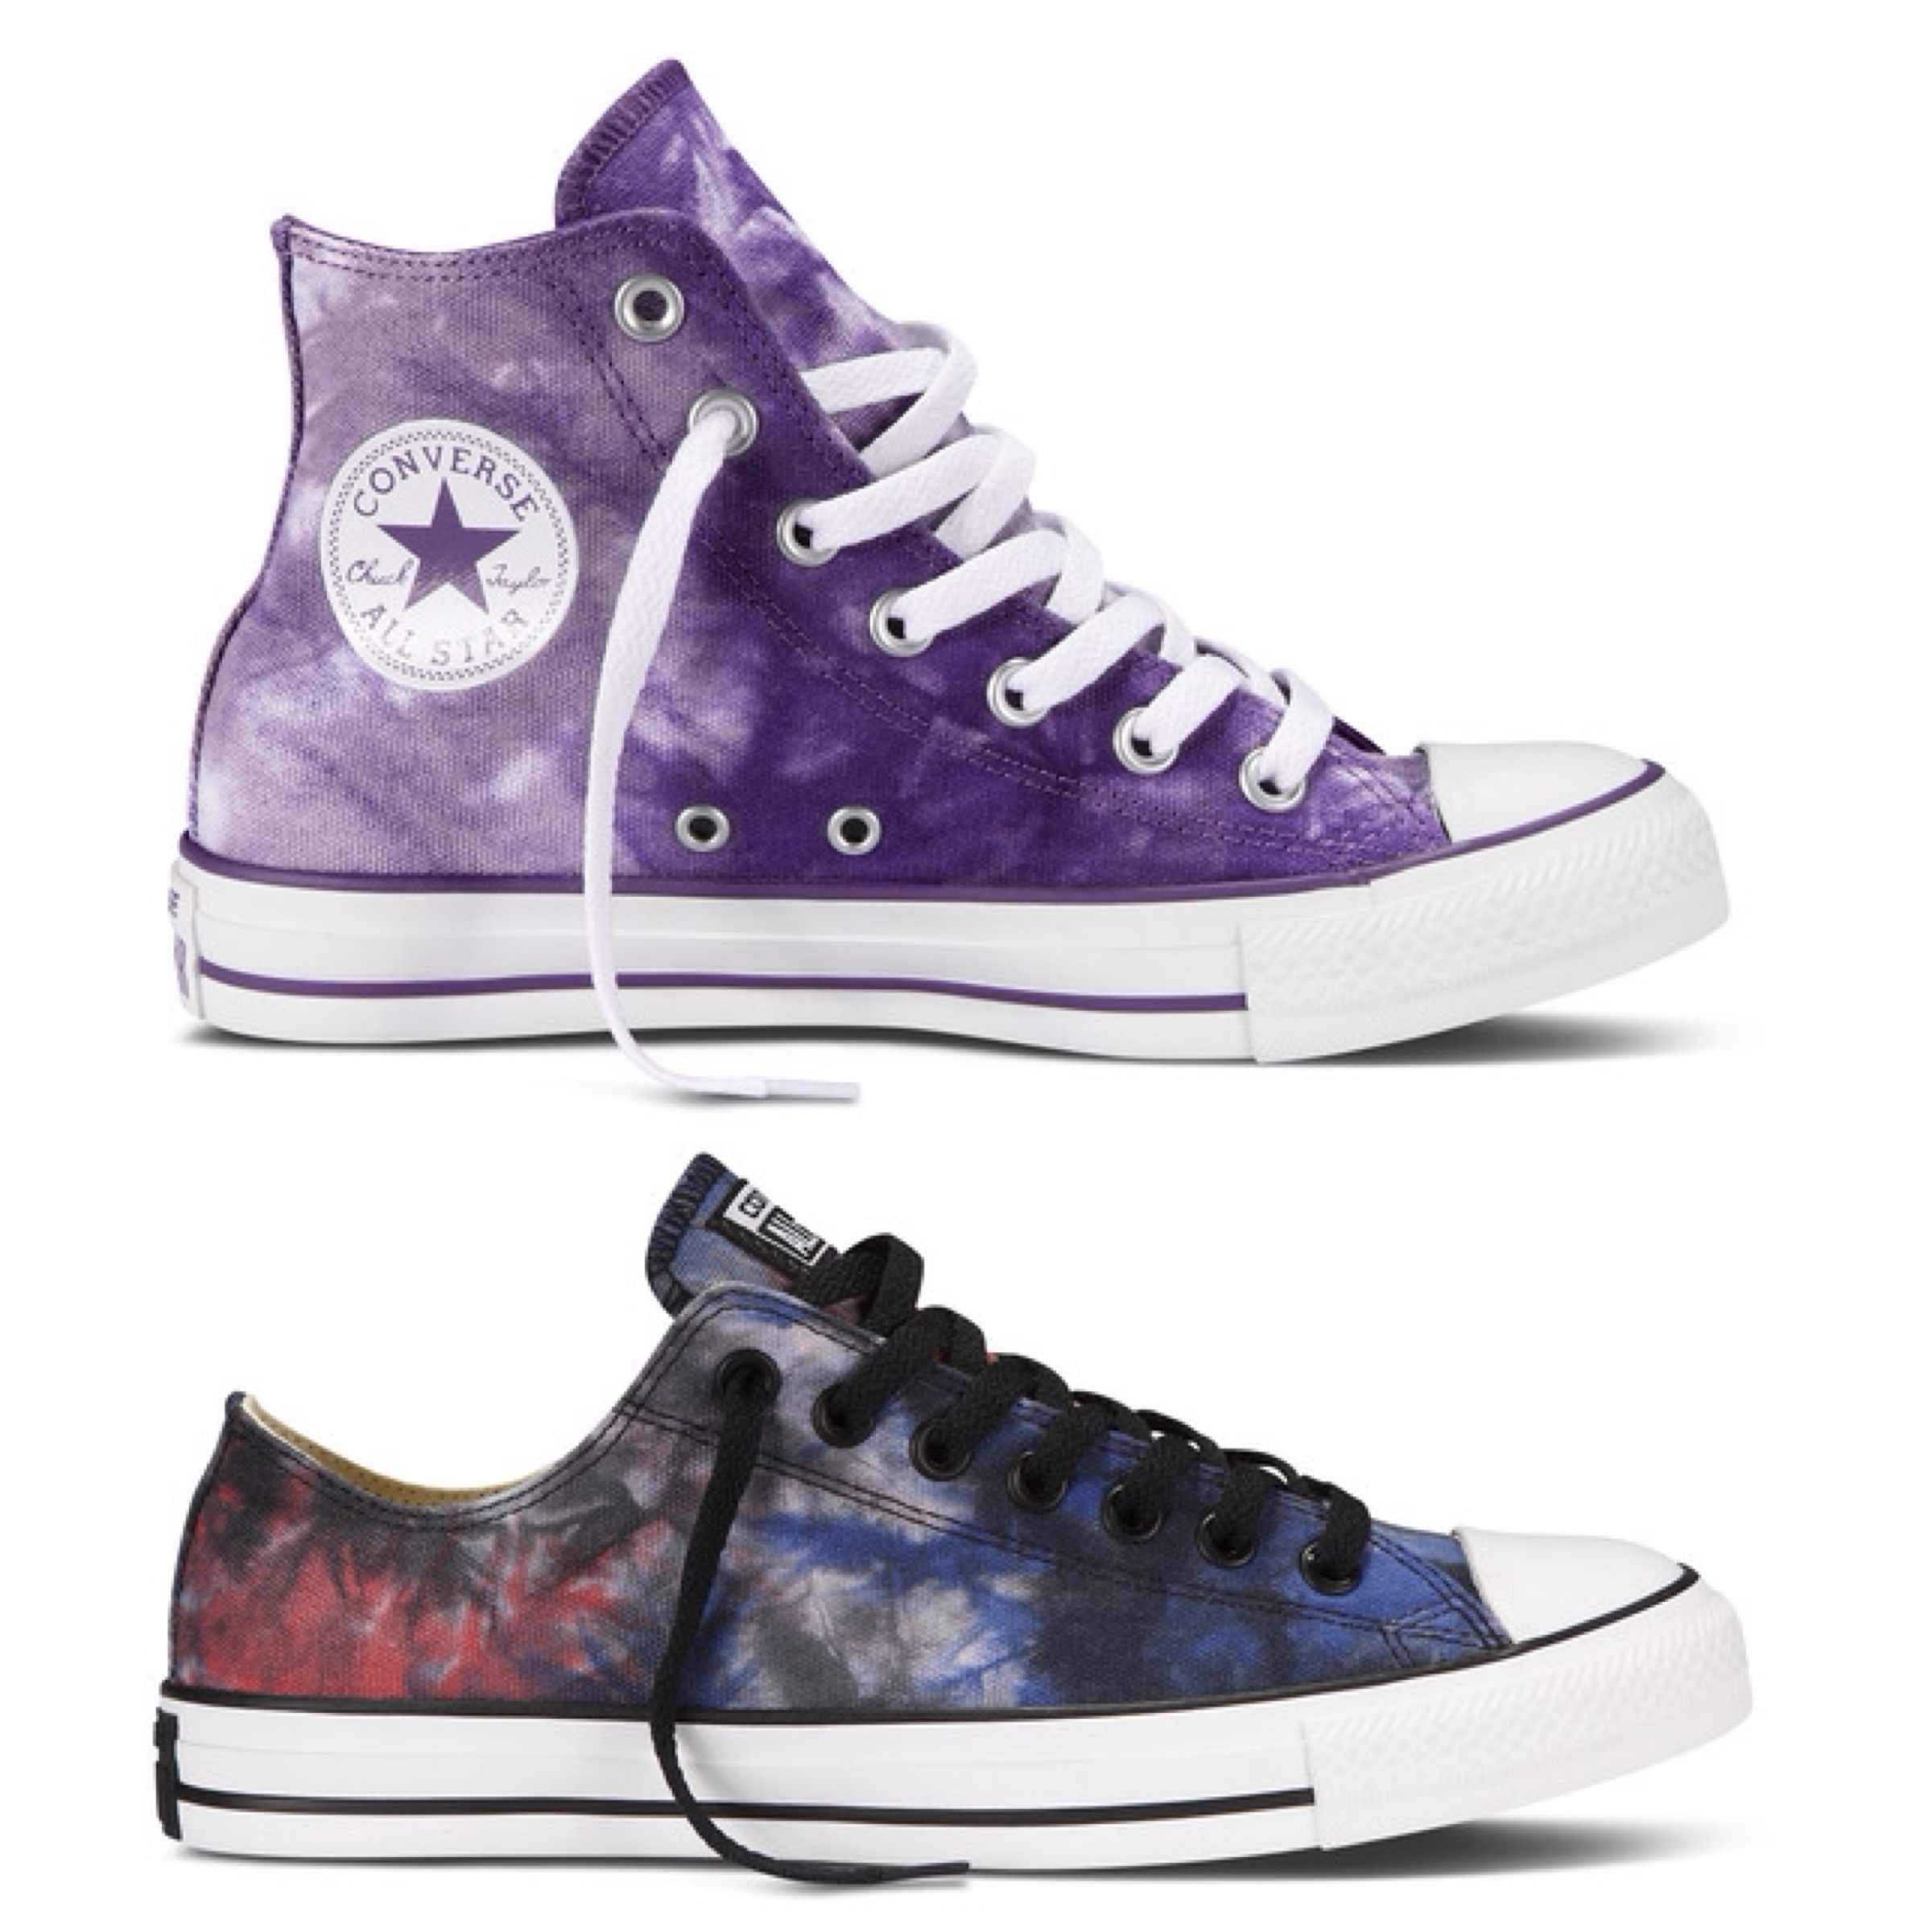 Editor's Pick: Converse Spring 2014 Collection